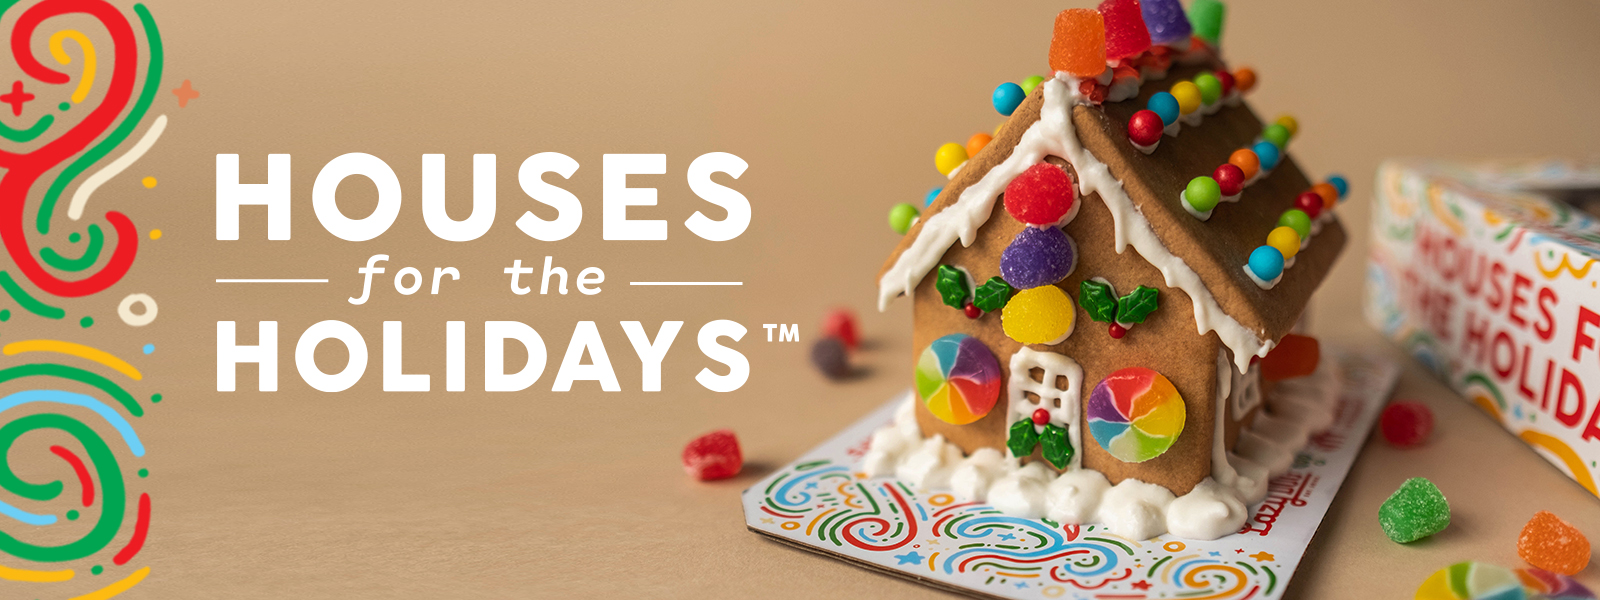 Houses for the Holidays Are Back!